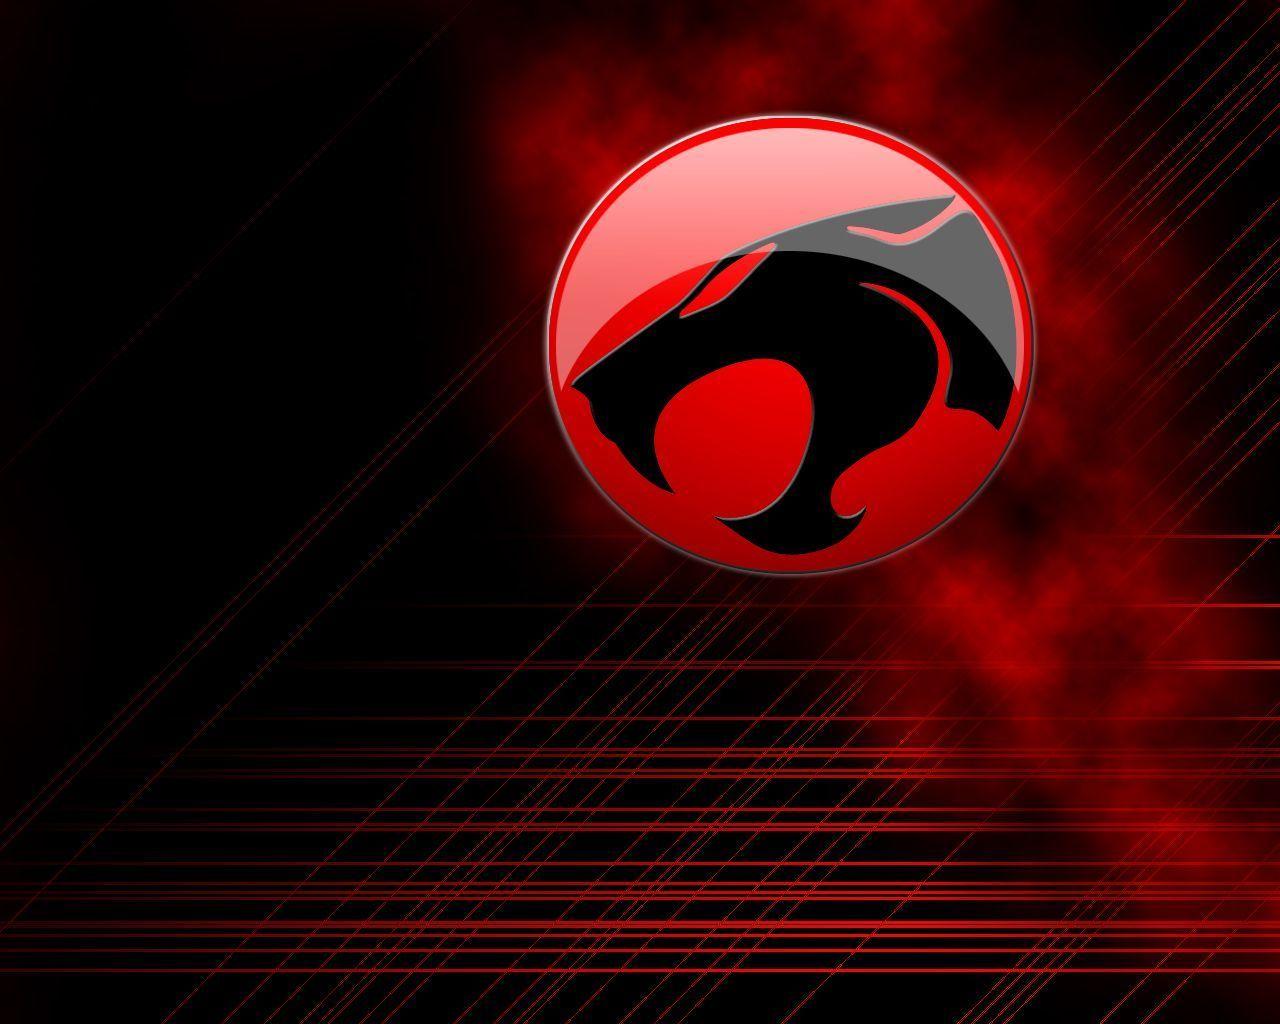 ThunderCats Backgrounds - Wallpaper Cave